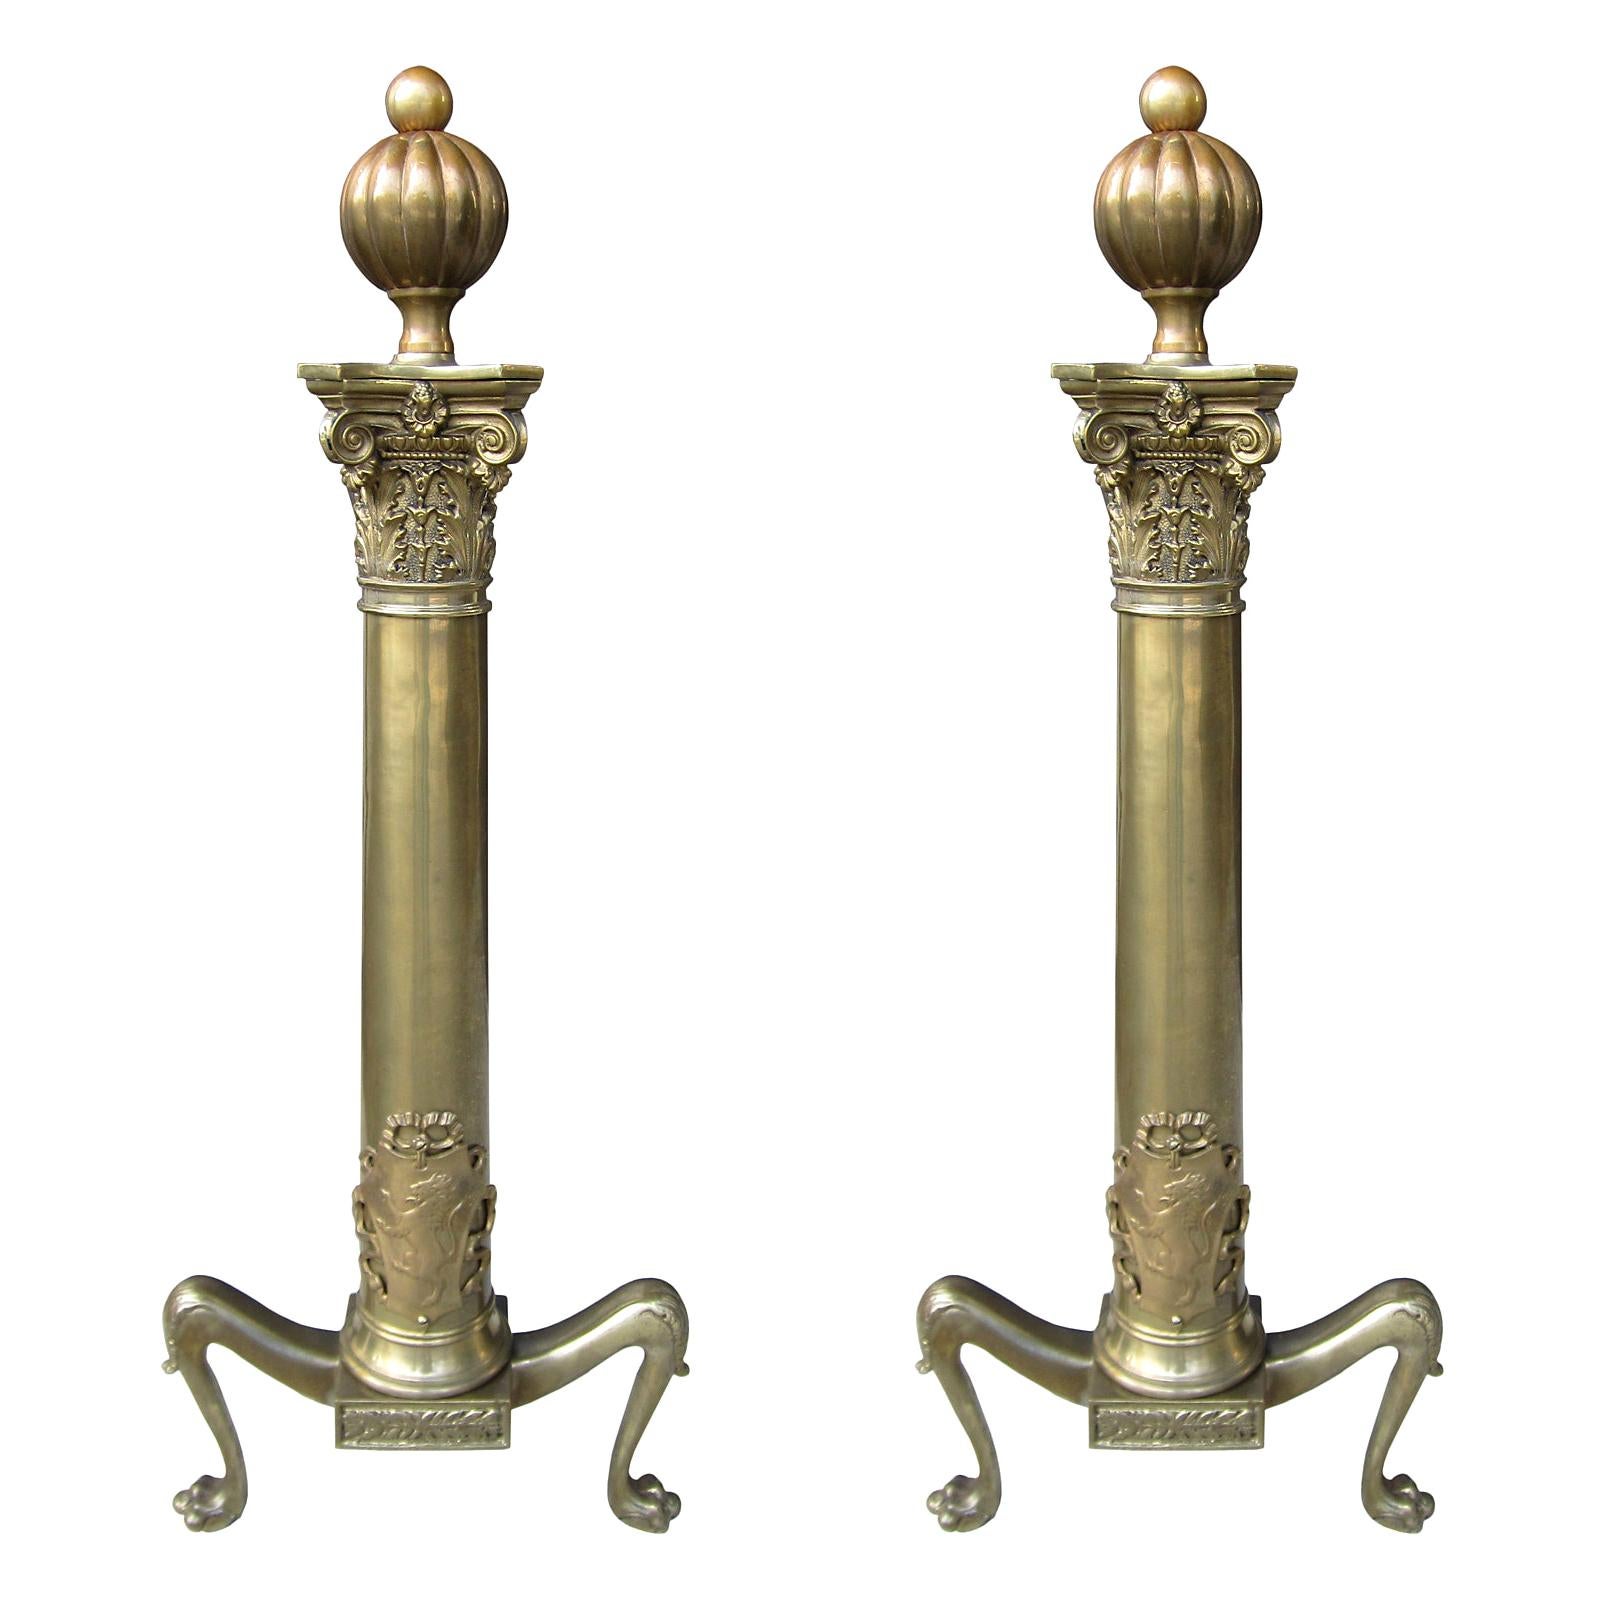 Pair of 19th Century English Brass Andirons with Lions